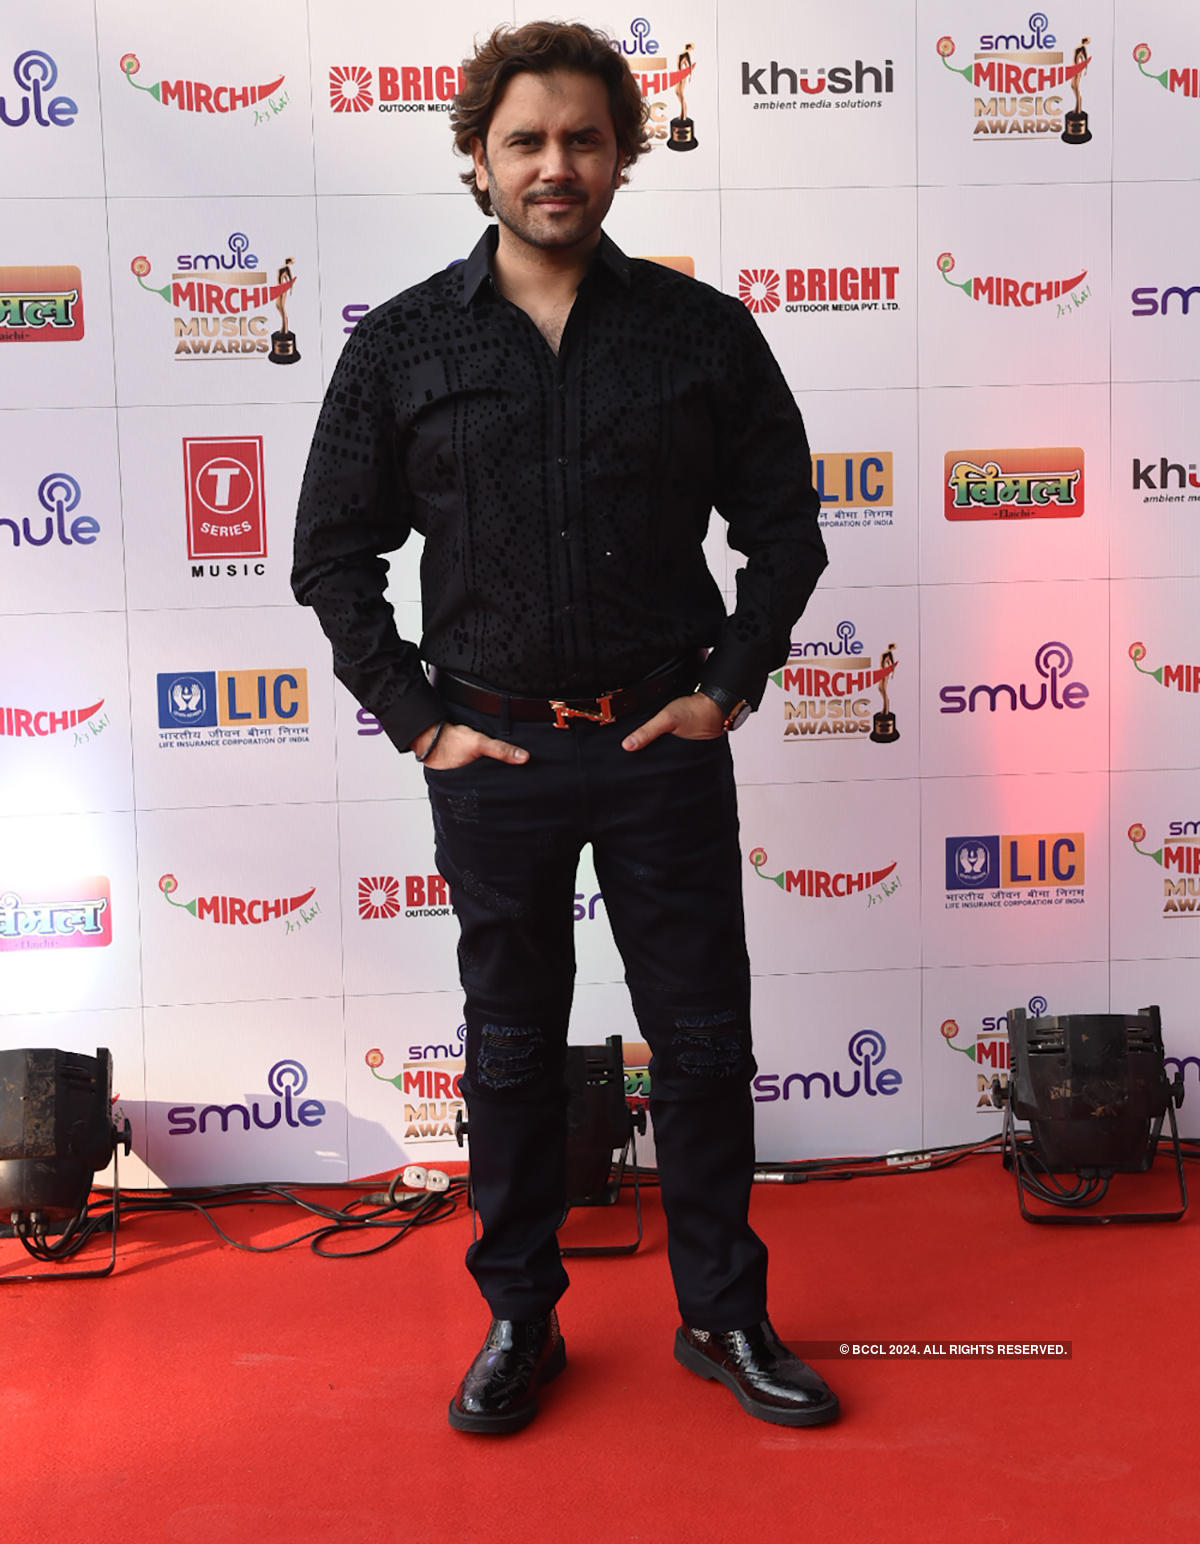 13th Smule Mirchi Music Awards: Red carpet